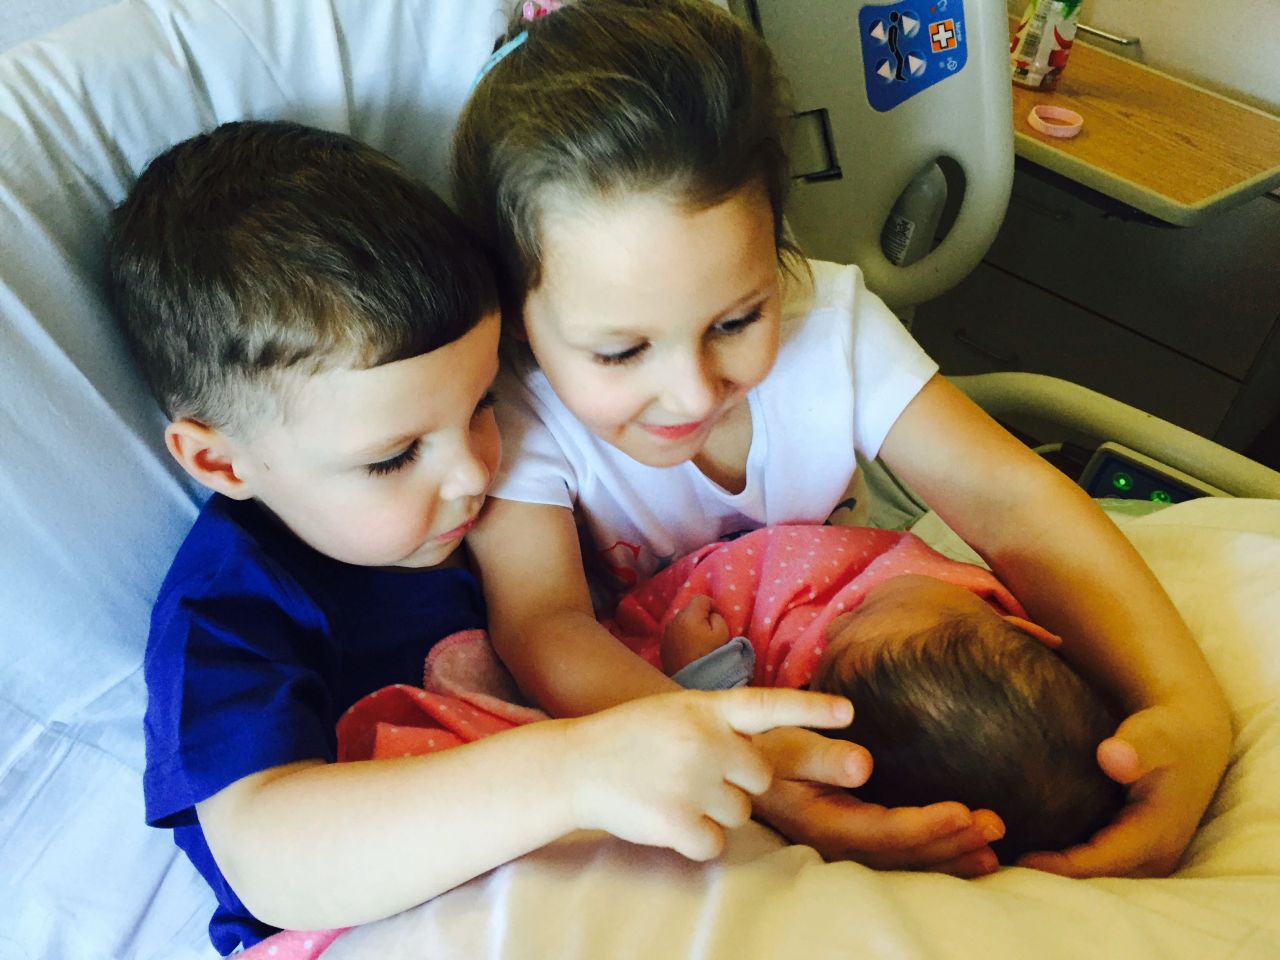 "This being my third cesarean delivery, they were adequately prepped on being gentle with both Mommy and baby once baby arrived. This picture was taken as they sat in my hospital bed, pillows all propped up, proudly sporting their big brother and big sister shirts." -- <a href="http://ireport.cnn.com/docs/DOC-1231814">Robyn Augustine</a>, Monroe, Connecticut 